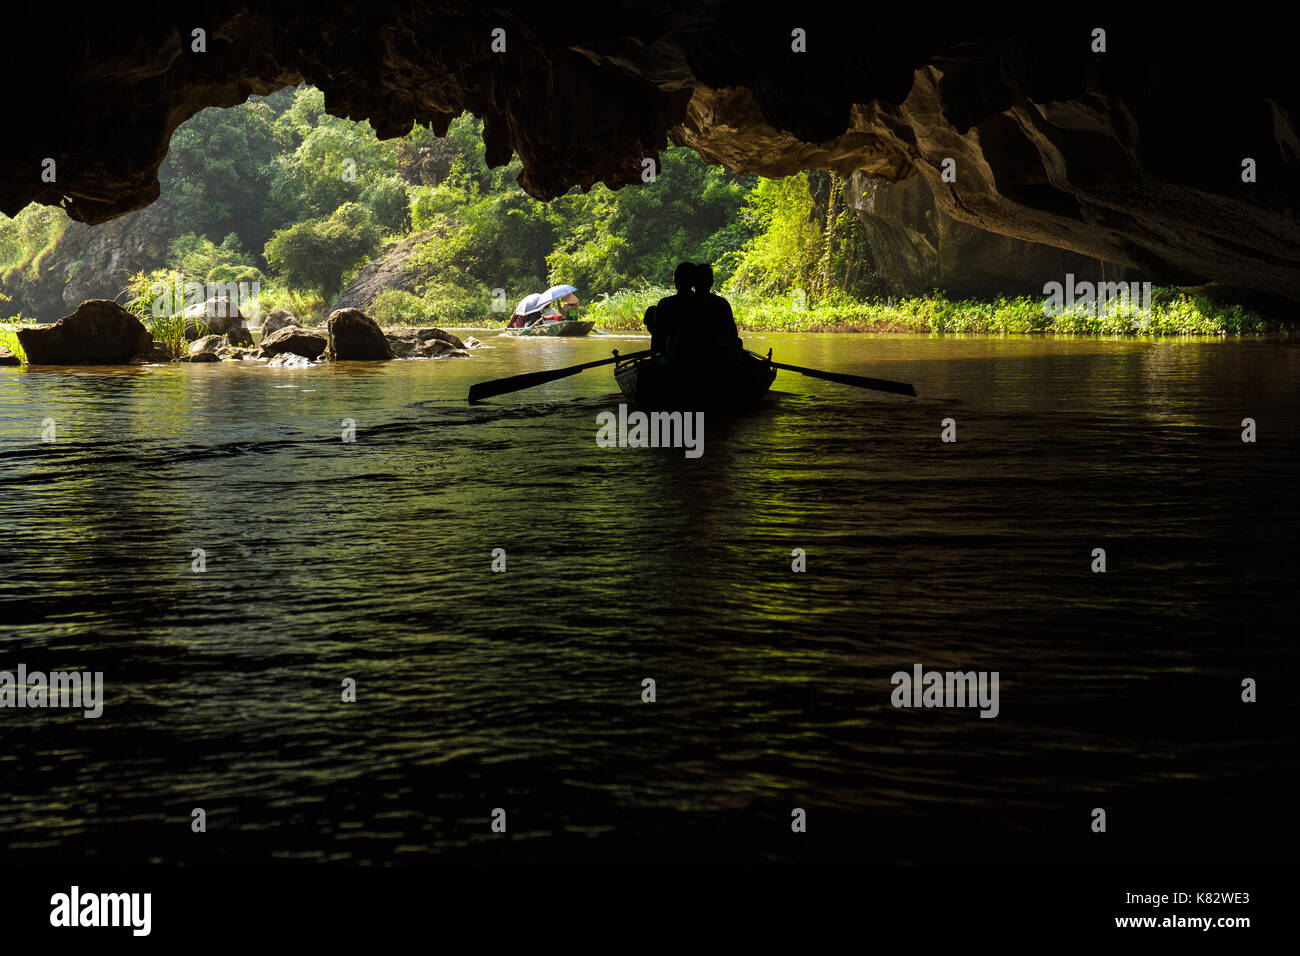 Two boats pass through a flooded cave on the Ngo Dong River, near Tam Coc village, at the Trang An UNESCO World Heritage site in Ninh Binh, Vietnam. Stock Photo